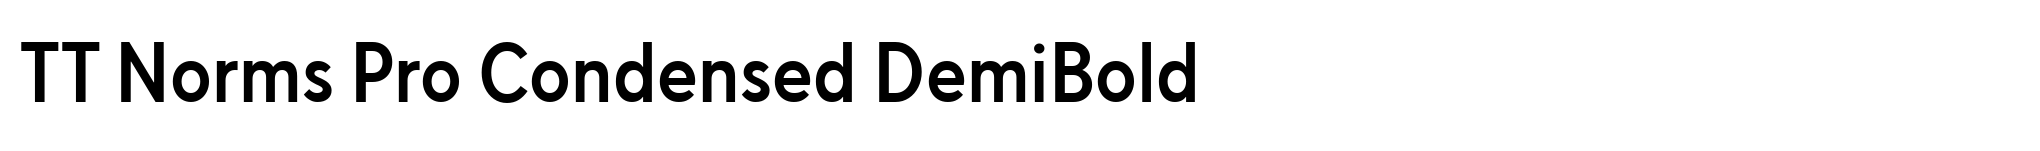 TT Norms Pro Condensed DemiBold image